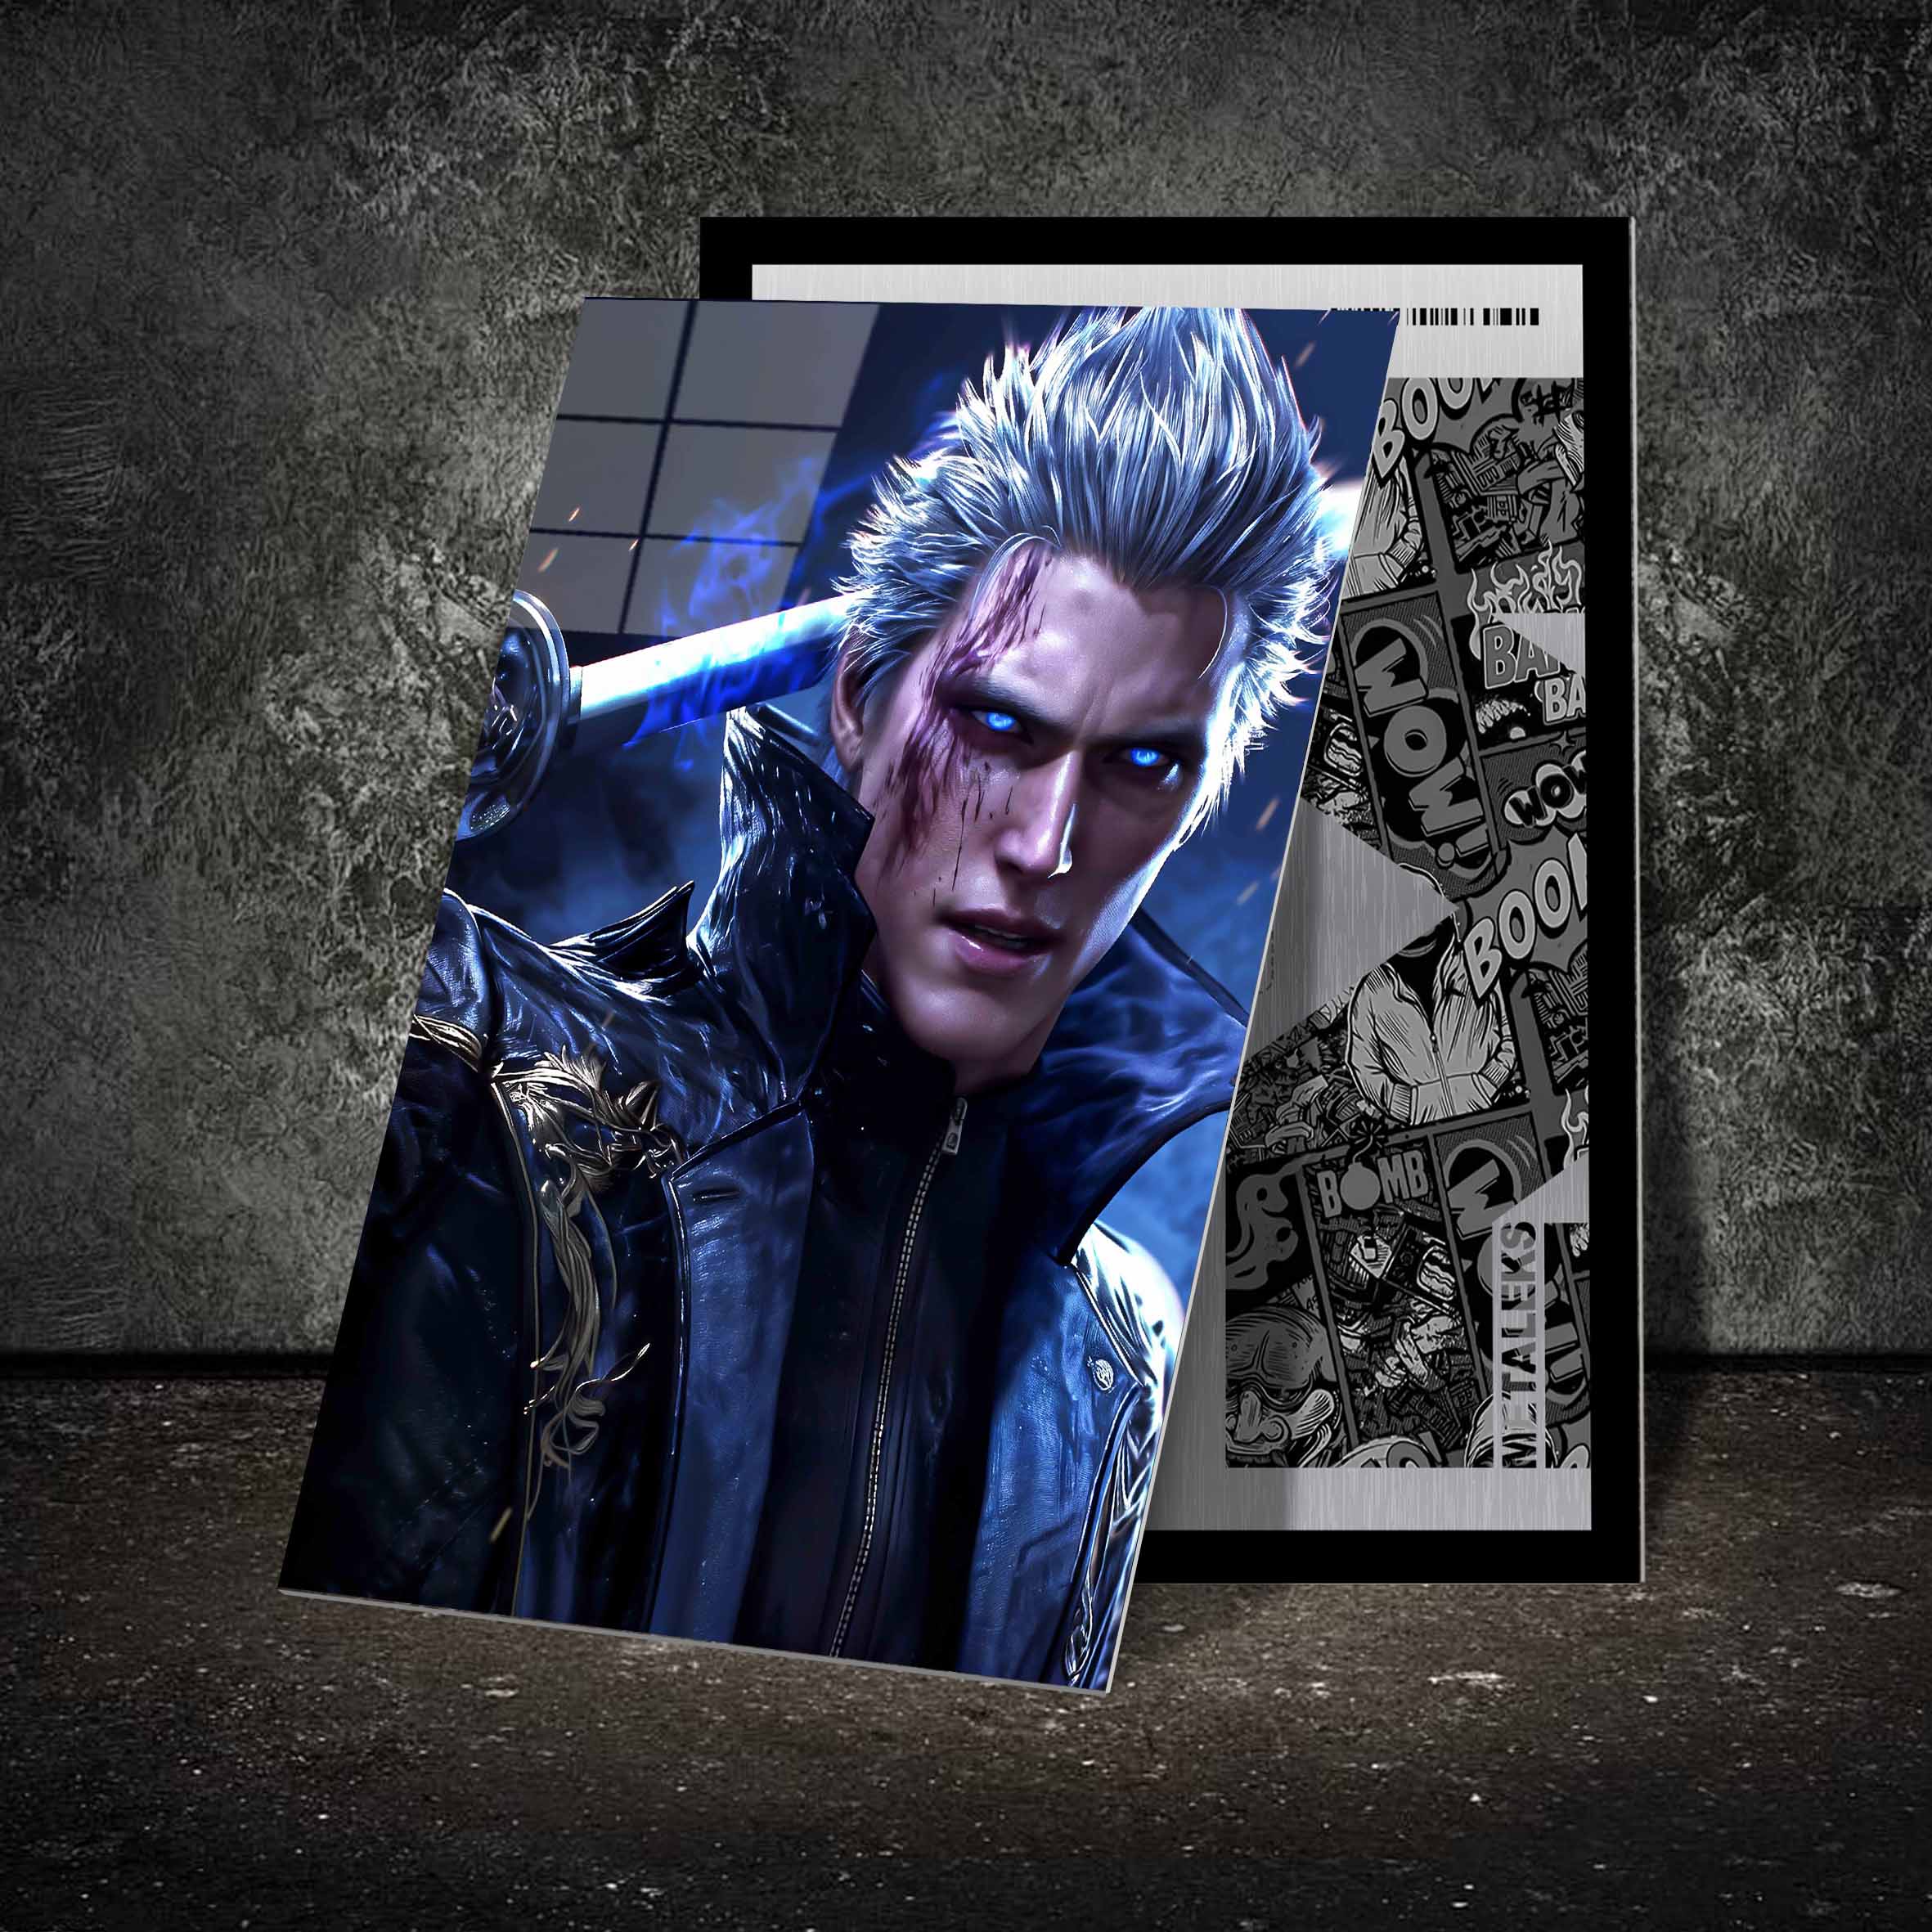 Vergil Devil May Cry-designed by @Freiart_mjr